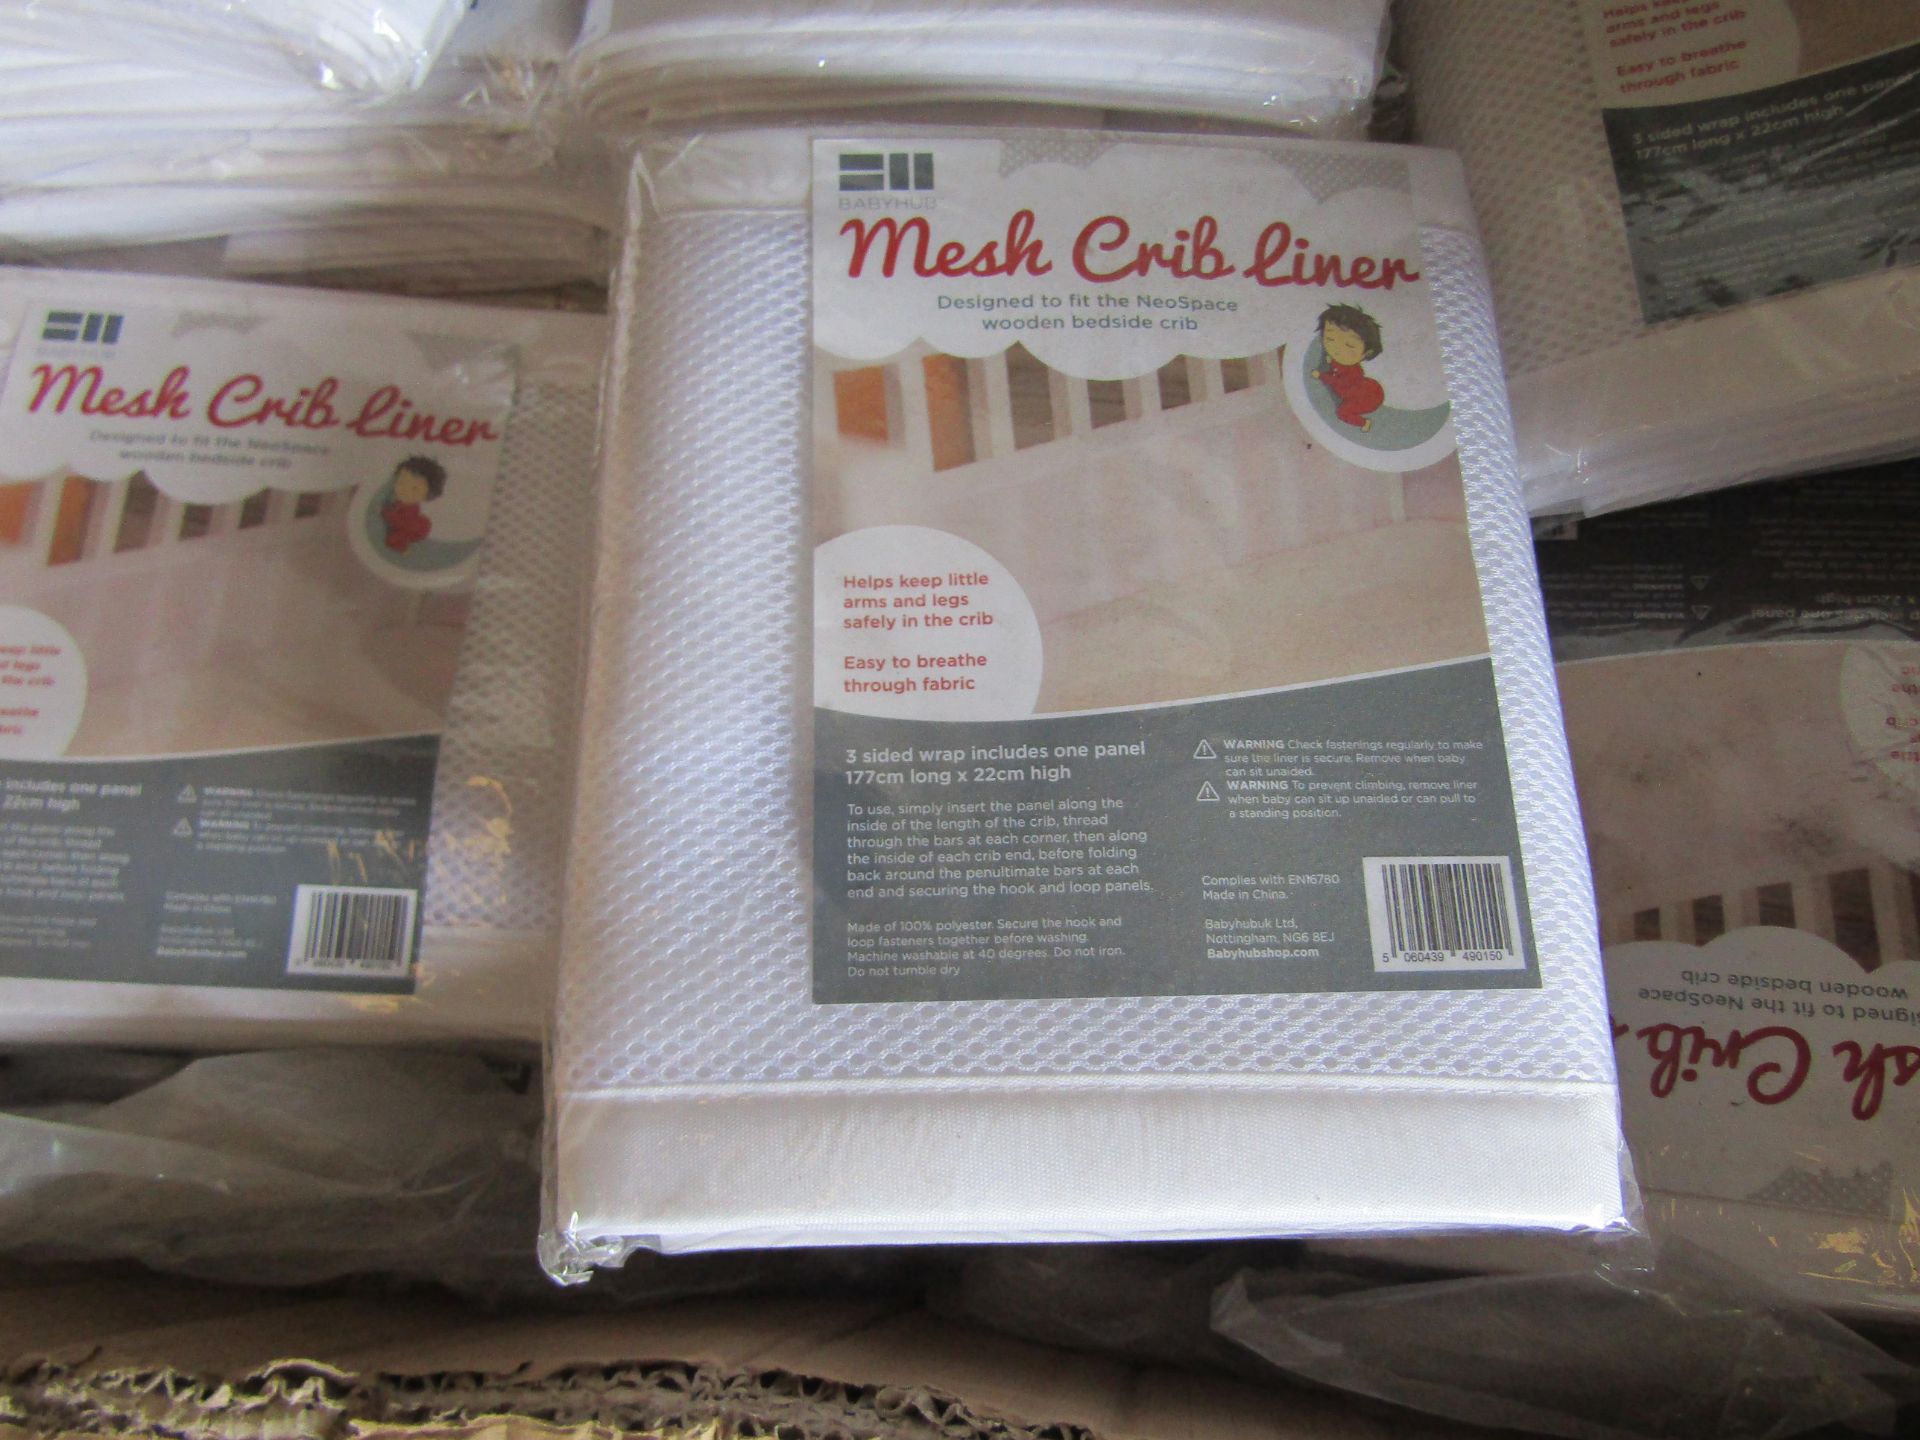 3x Baby Hub Mesh Crib Liner, 3 Sided Wrap Includes One Panel 177cm Long 22cm High - New & Packaged.